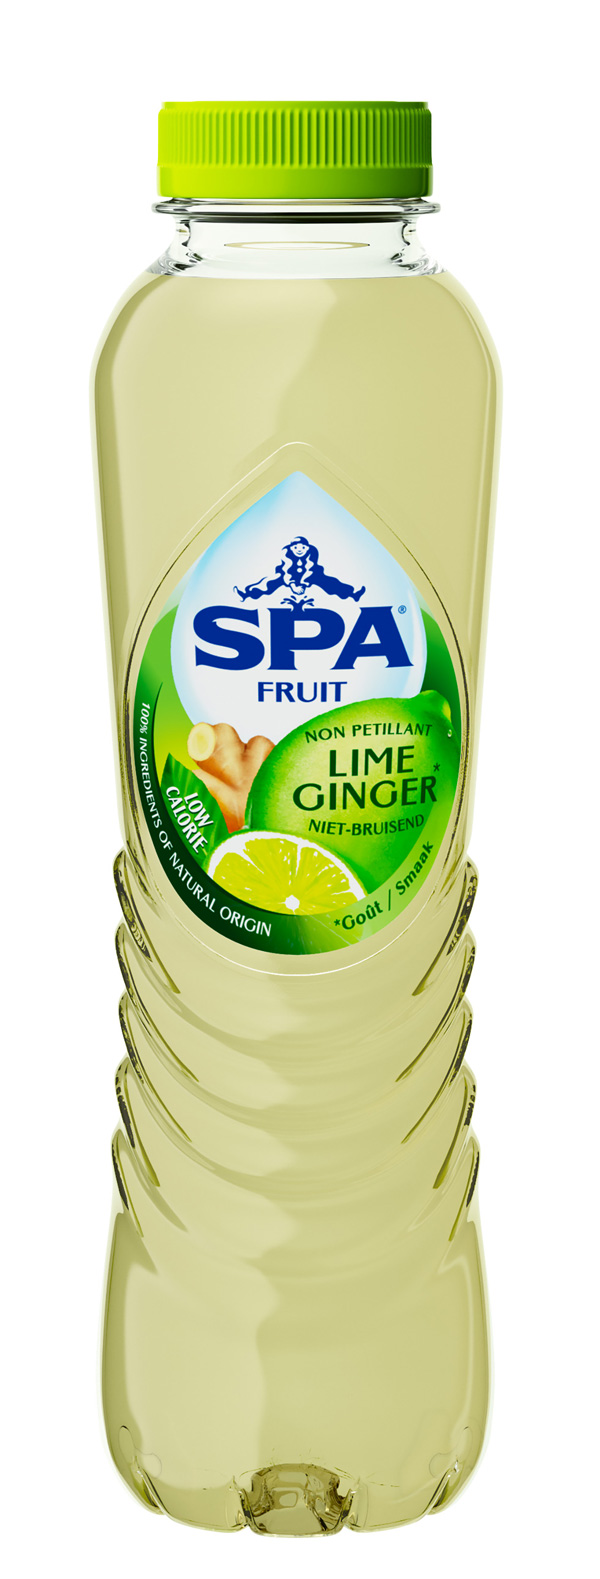 Lime-ginger niet-bruisend 40cl